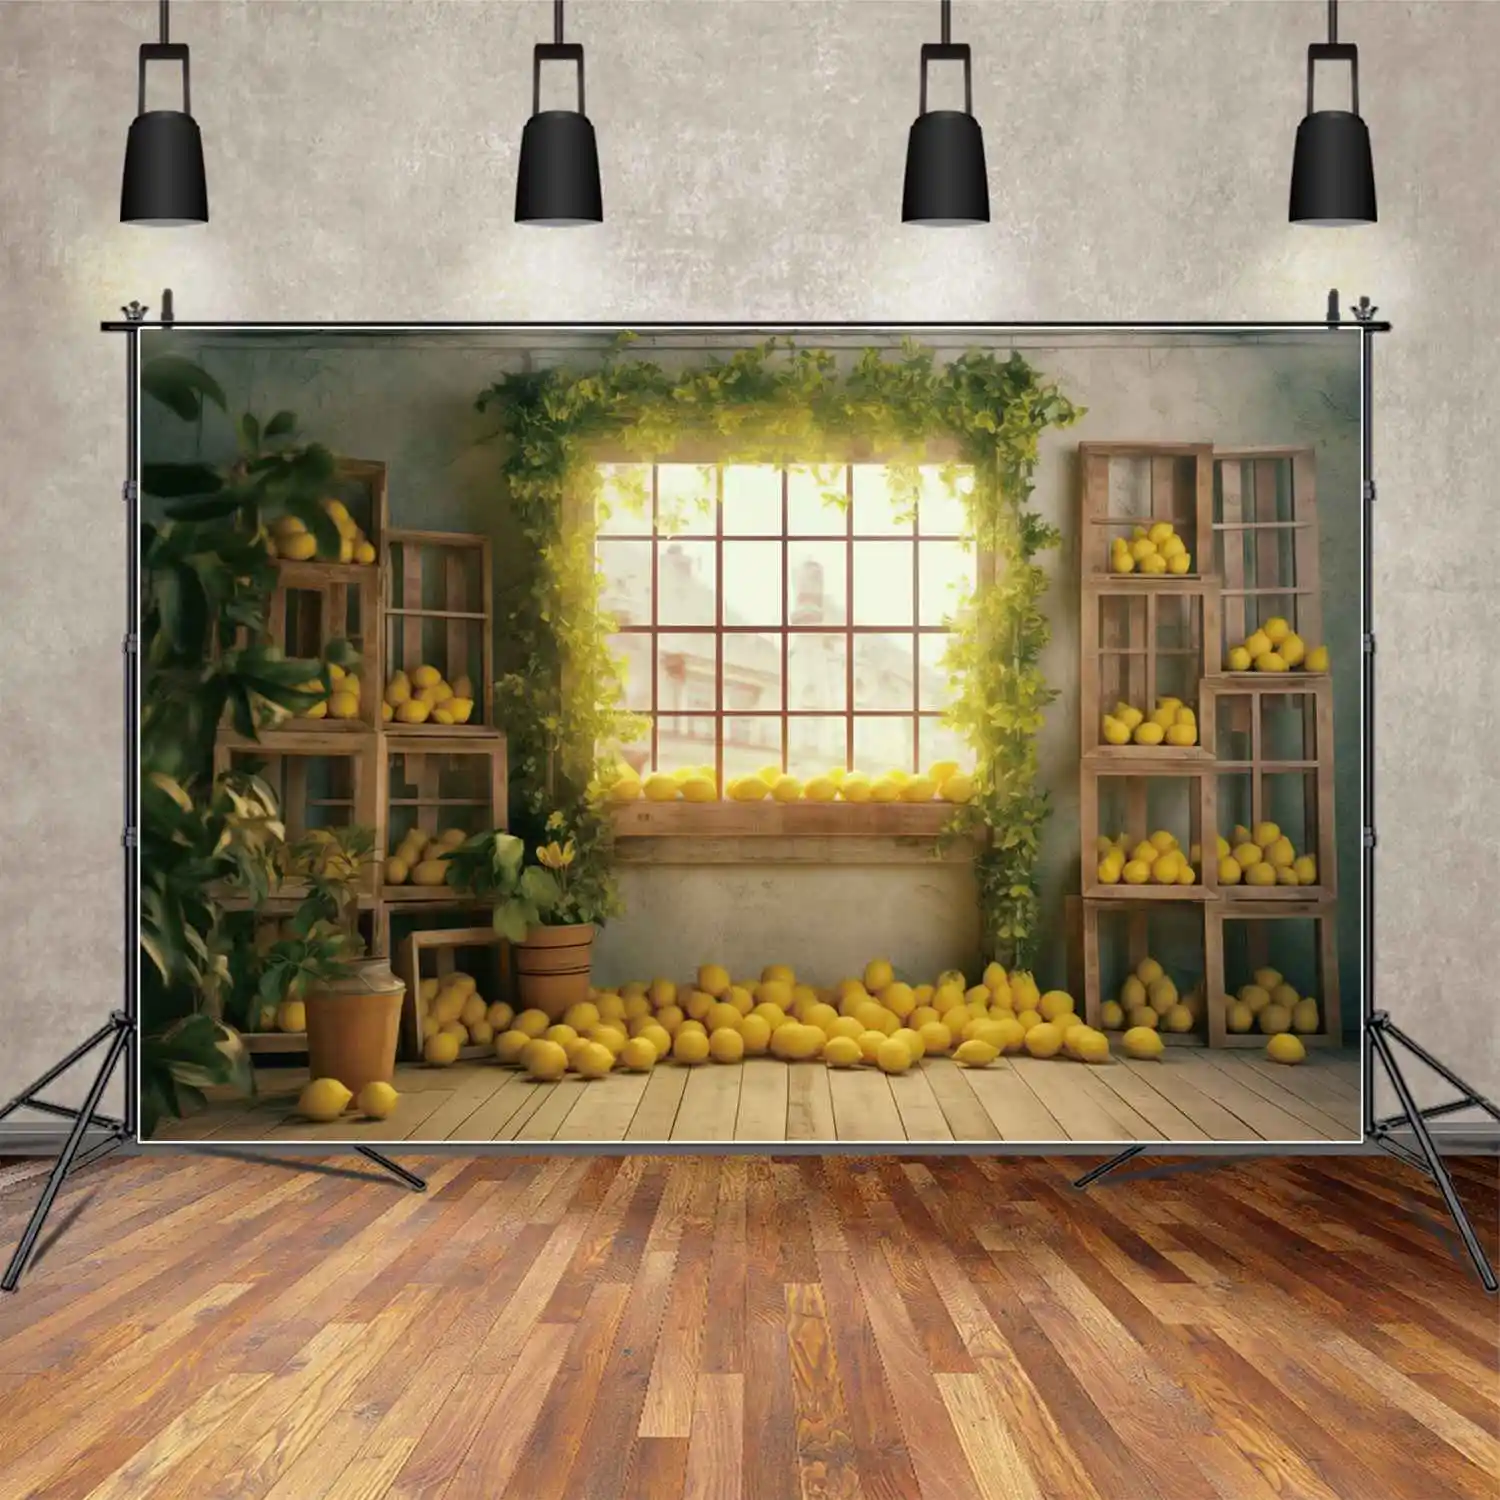 

MOON.QG Backdrop Thanksgiving Window Party Autumn Harvest Decoration Background Customized Rural Theme Prop Photo Booth Supplies